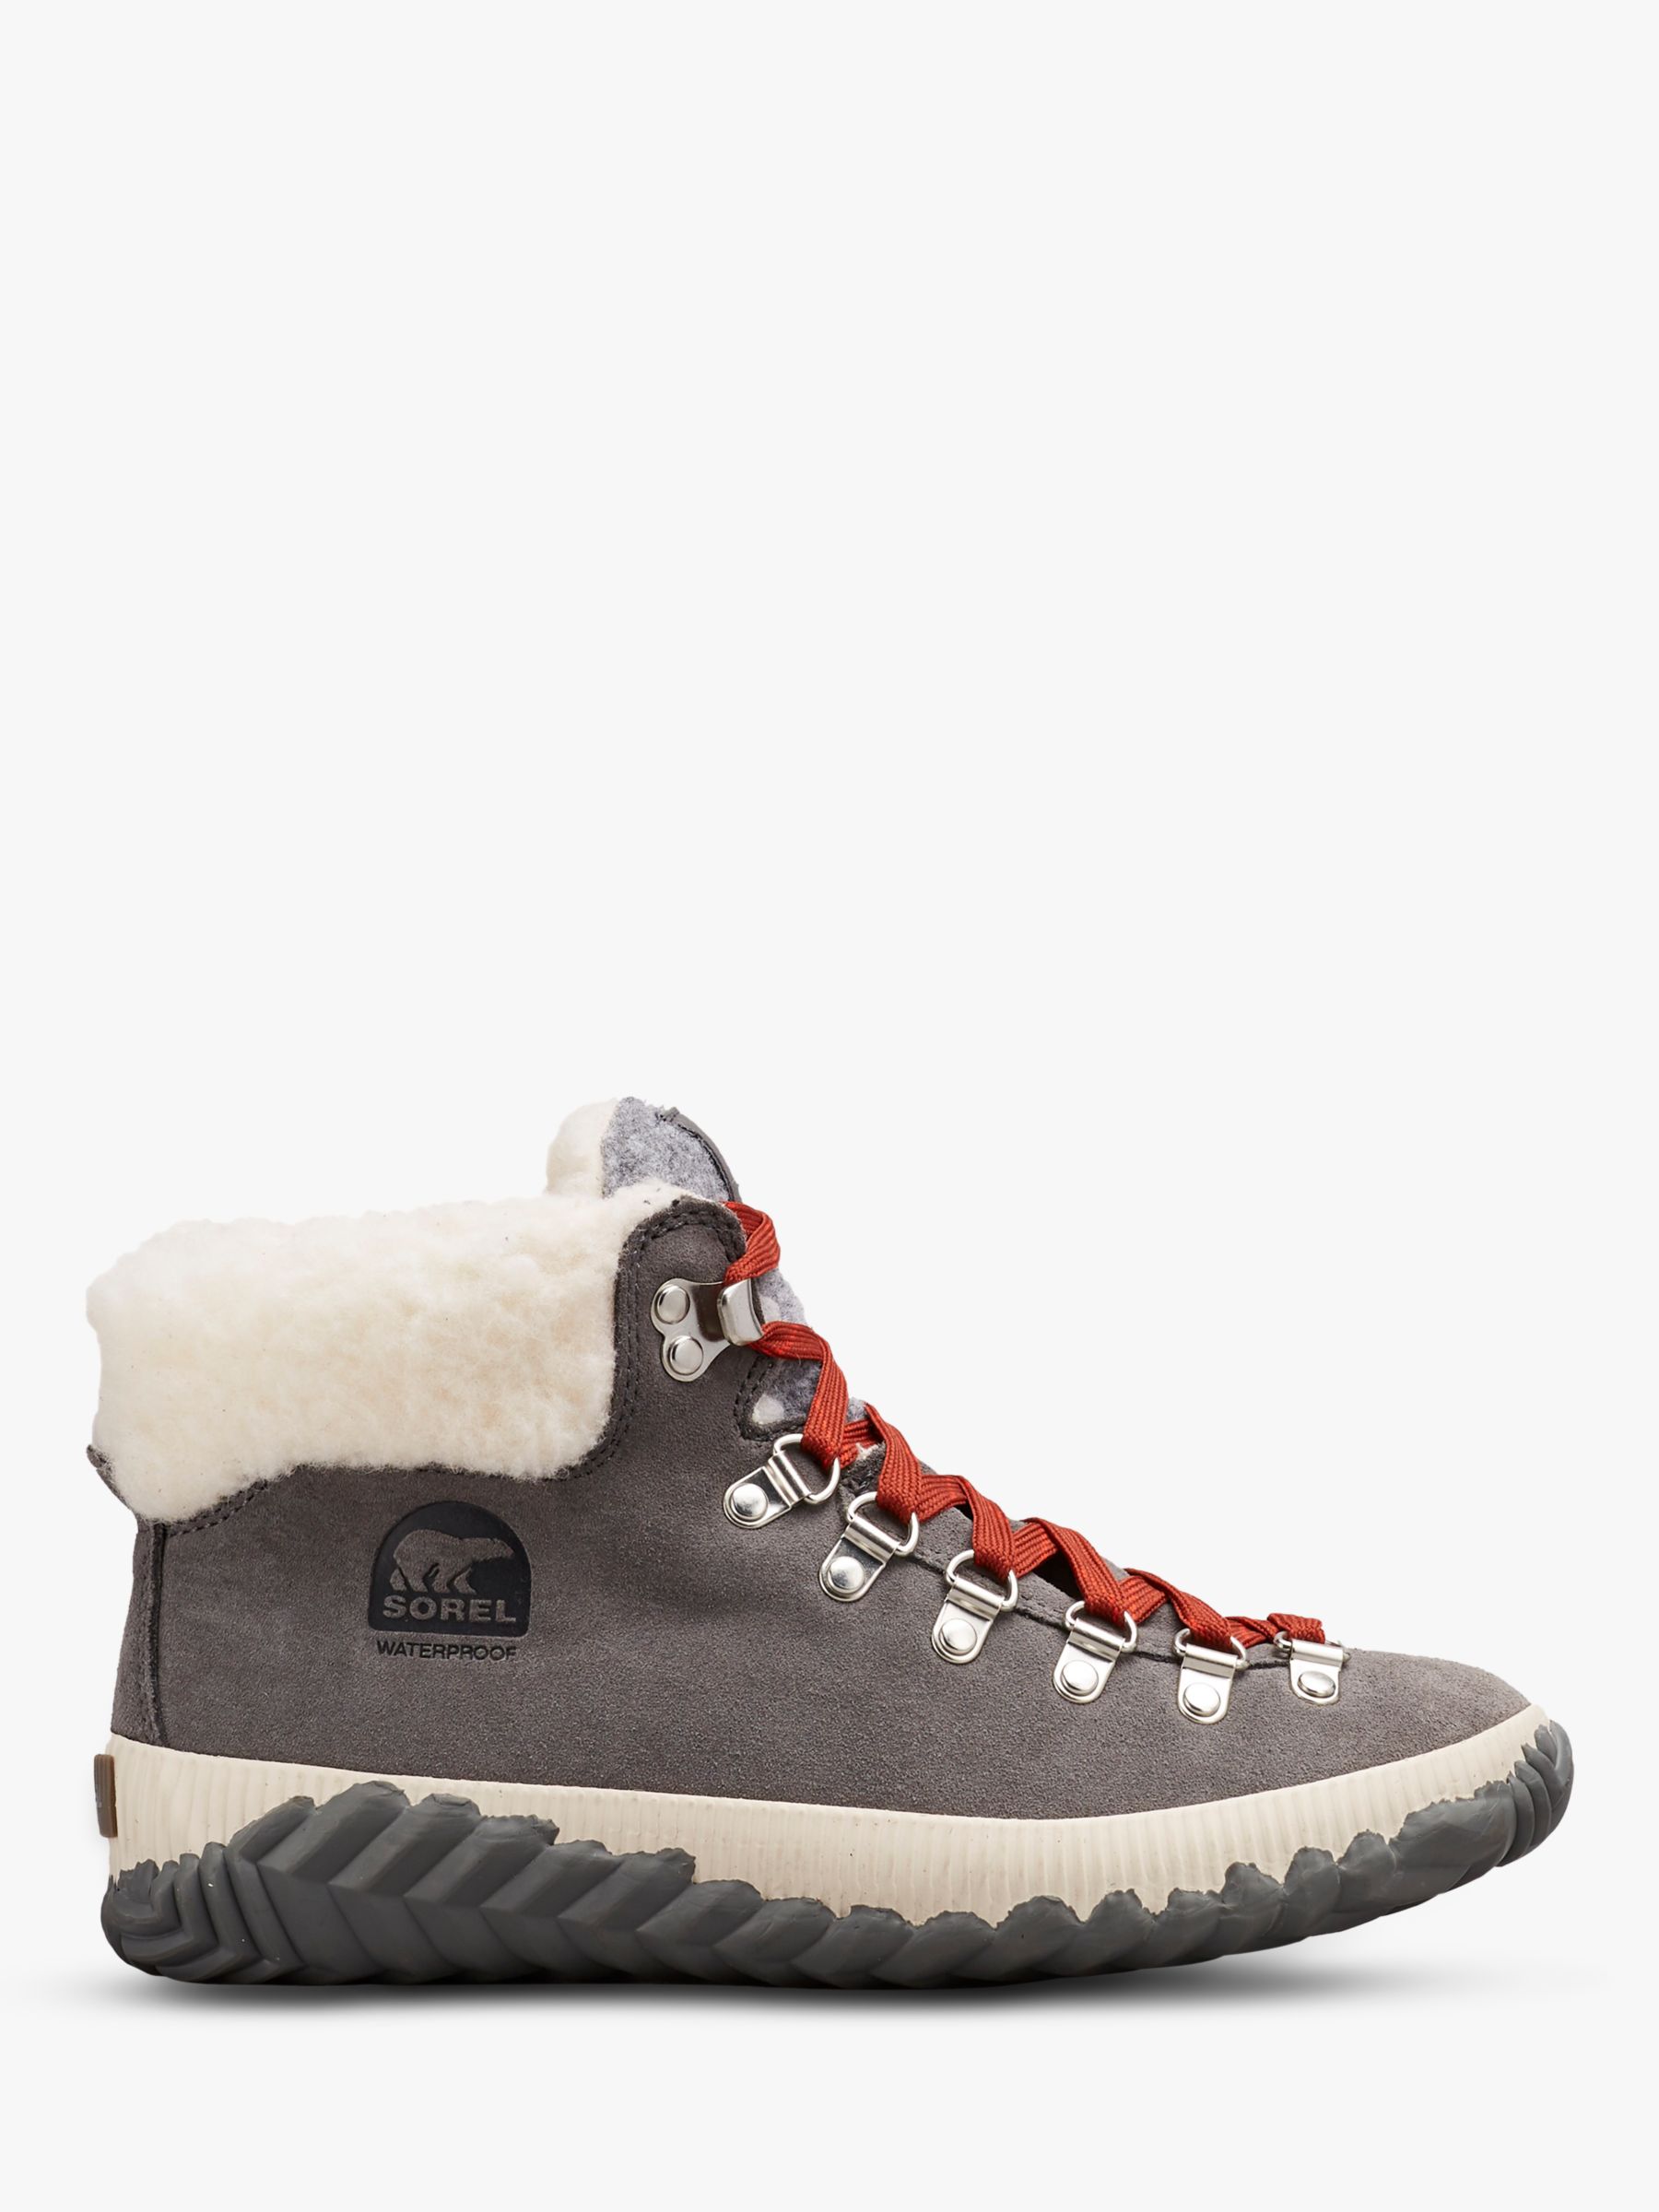 Sorel Out N About Suede Snow Boots, Grey at John Lewis & Partners